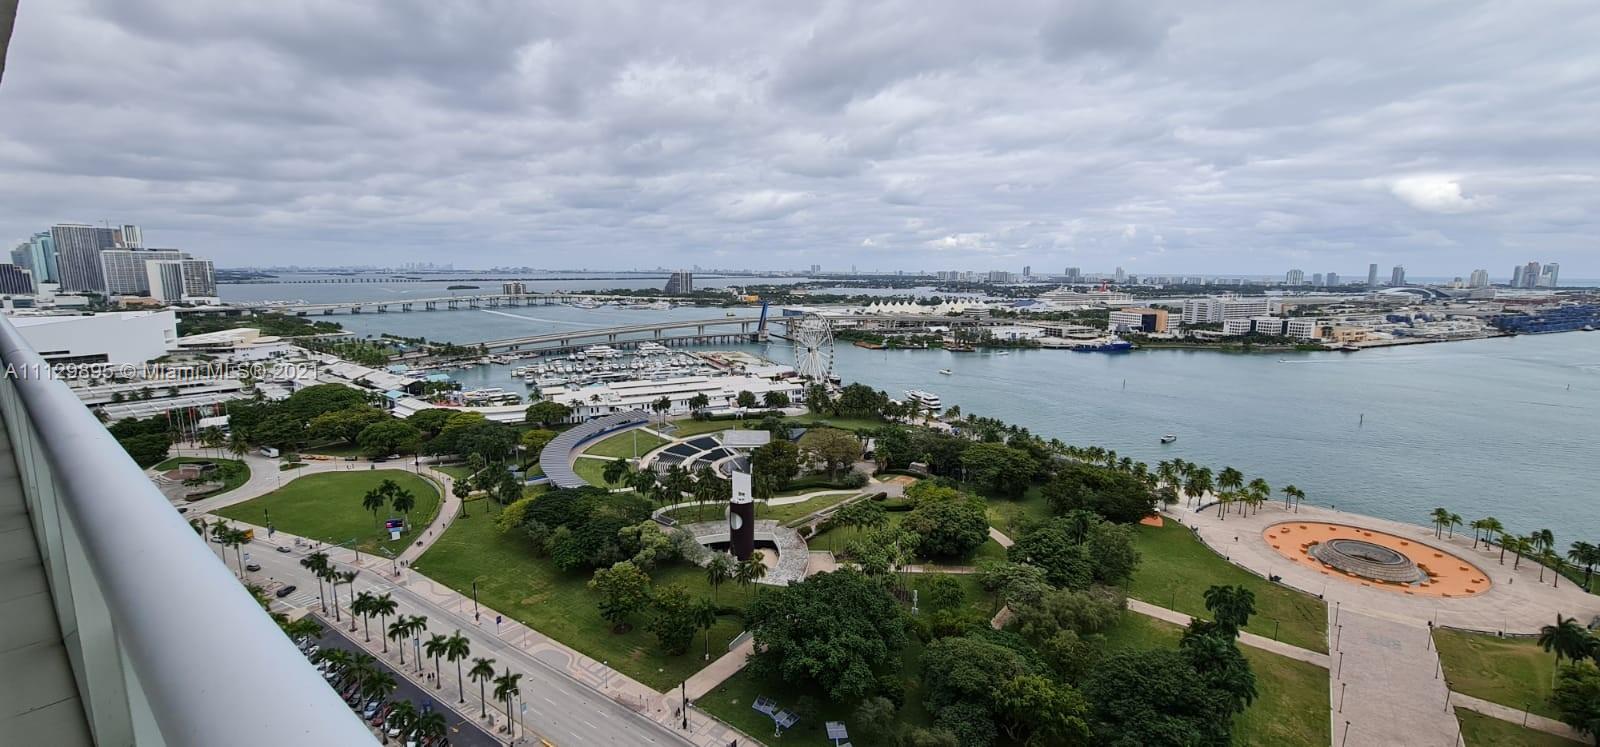 Live in Downtown Miami in this beautiful 3 bed 2 bath apartment on the 28th floor with spectacular views of the bay.  Close to restaurants, Whole Foods and the Metrorail.  This unit is available either furnished or unfurnished.  Best line in the building.